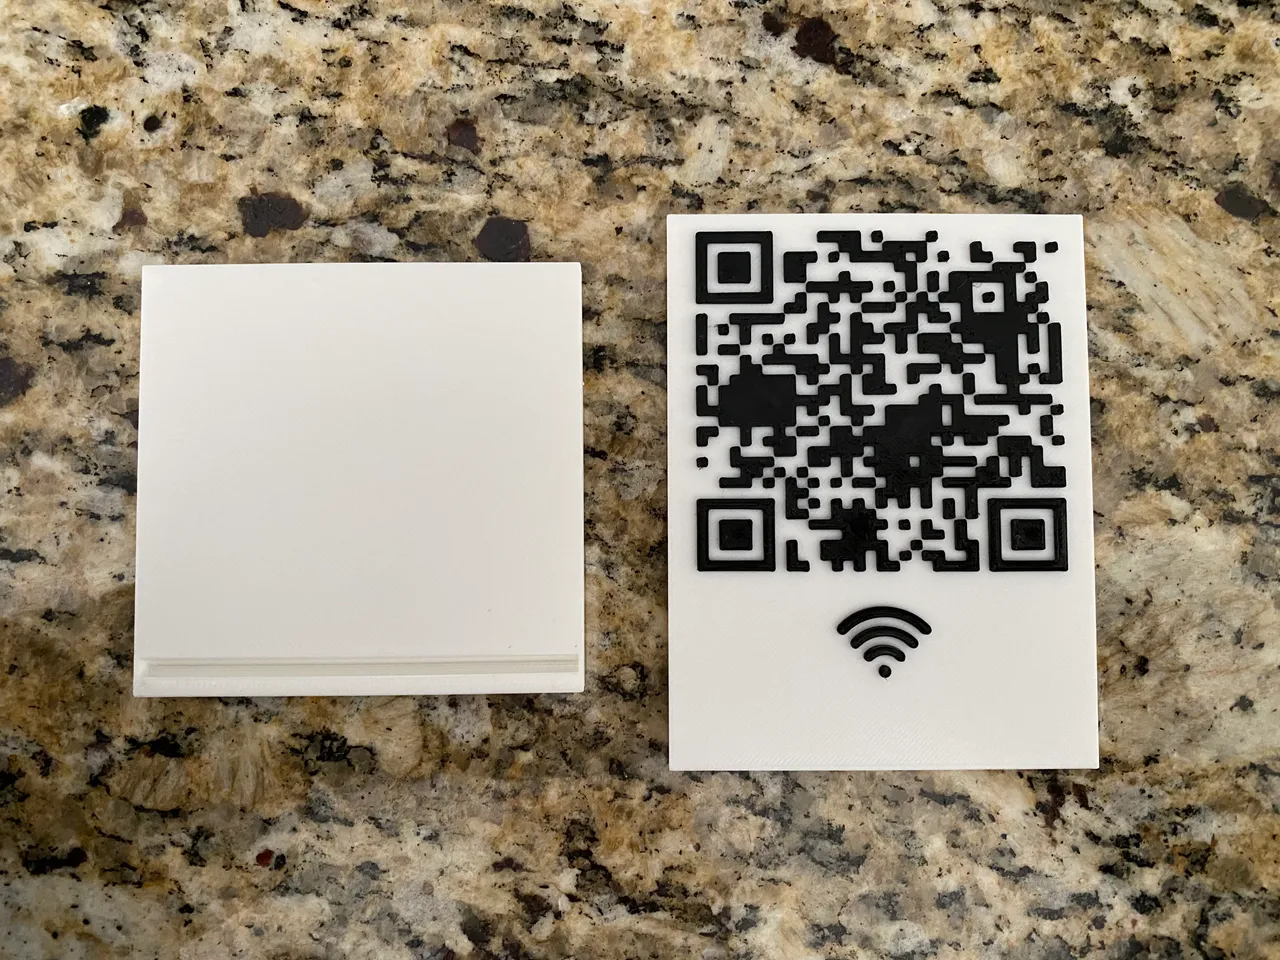 rickroll free wifi QR code by Theo, Download free STL model